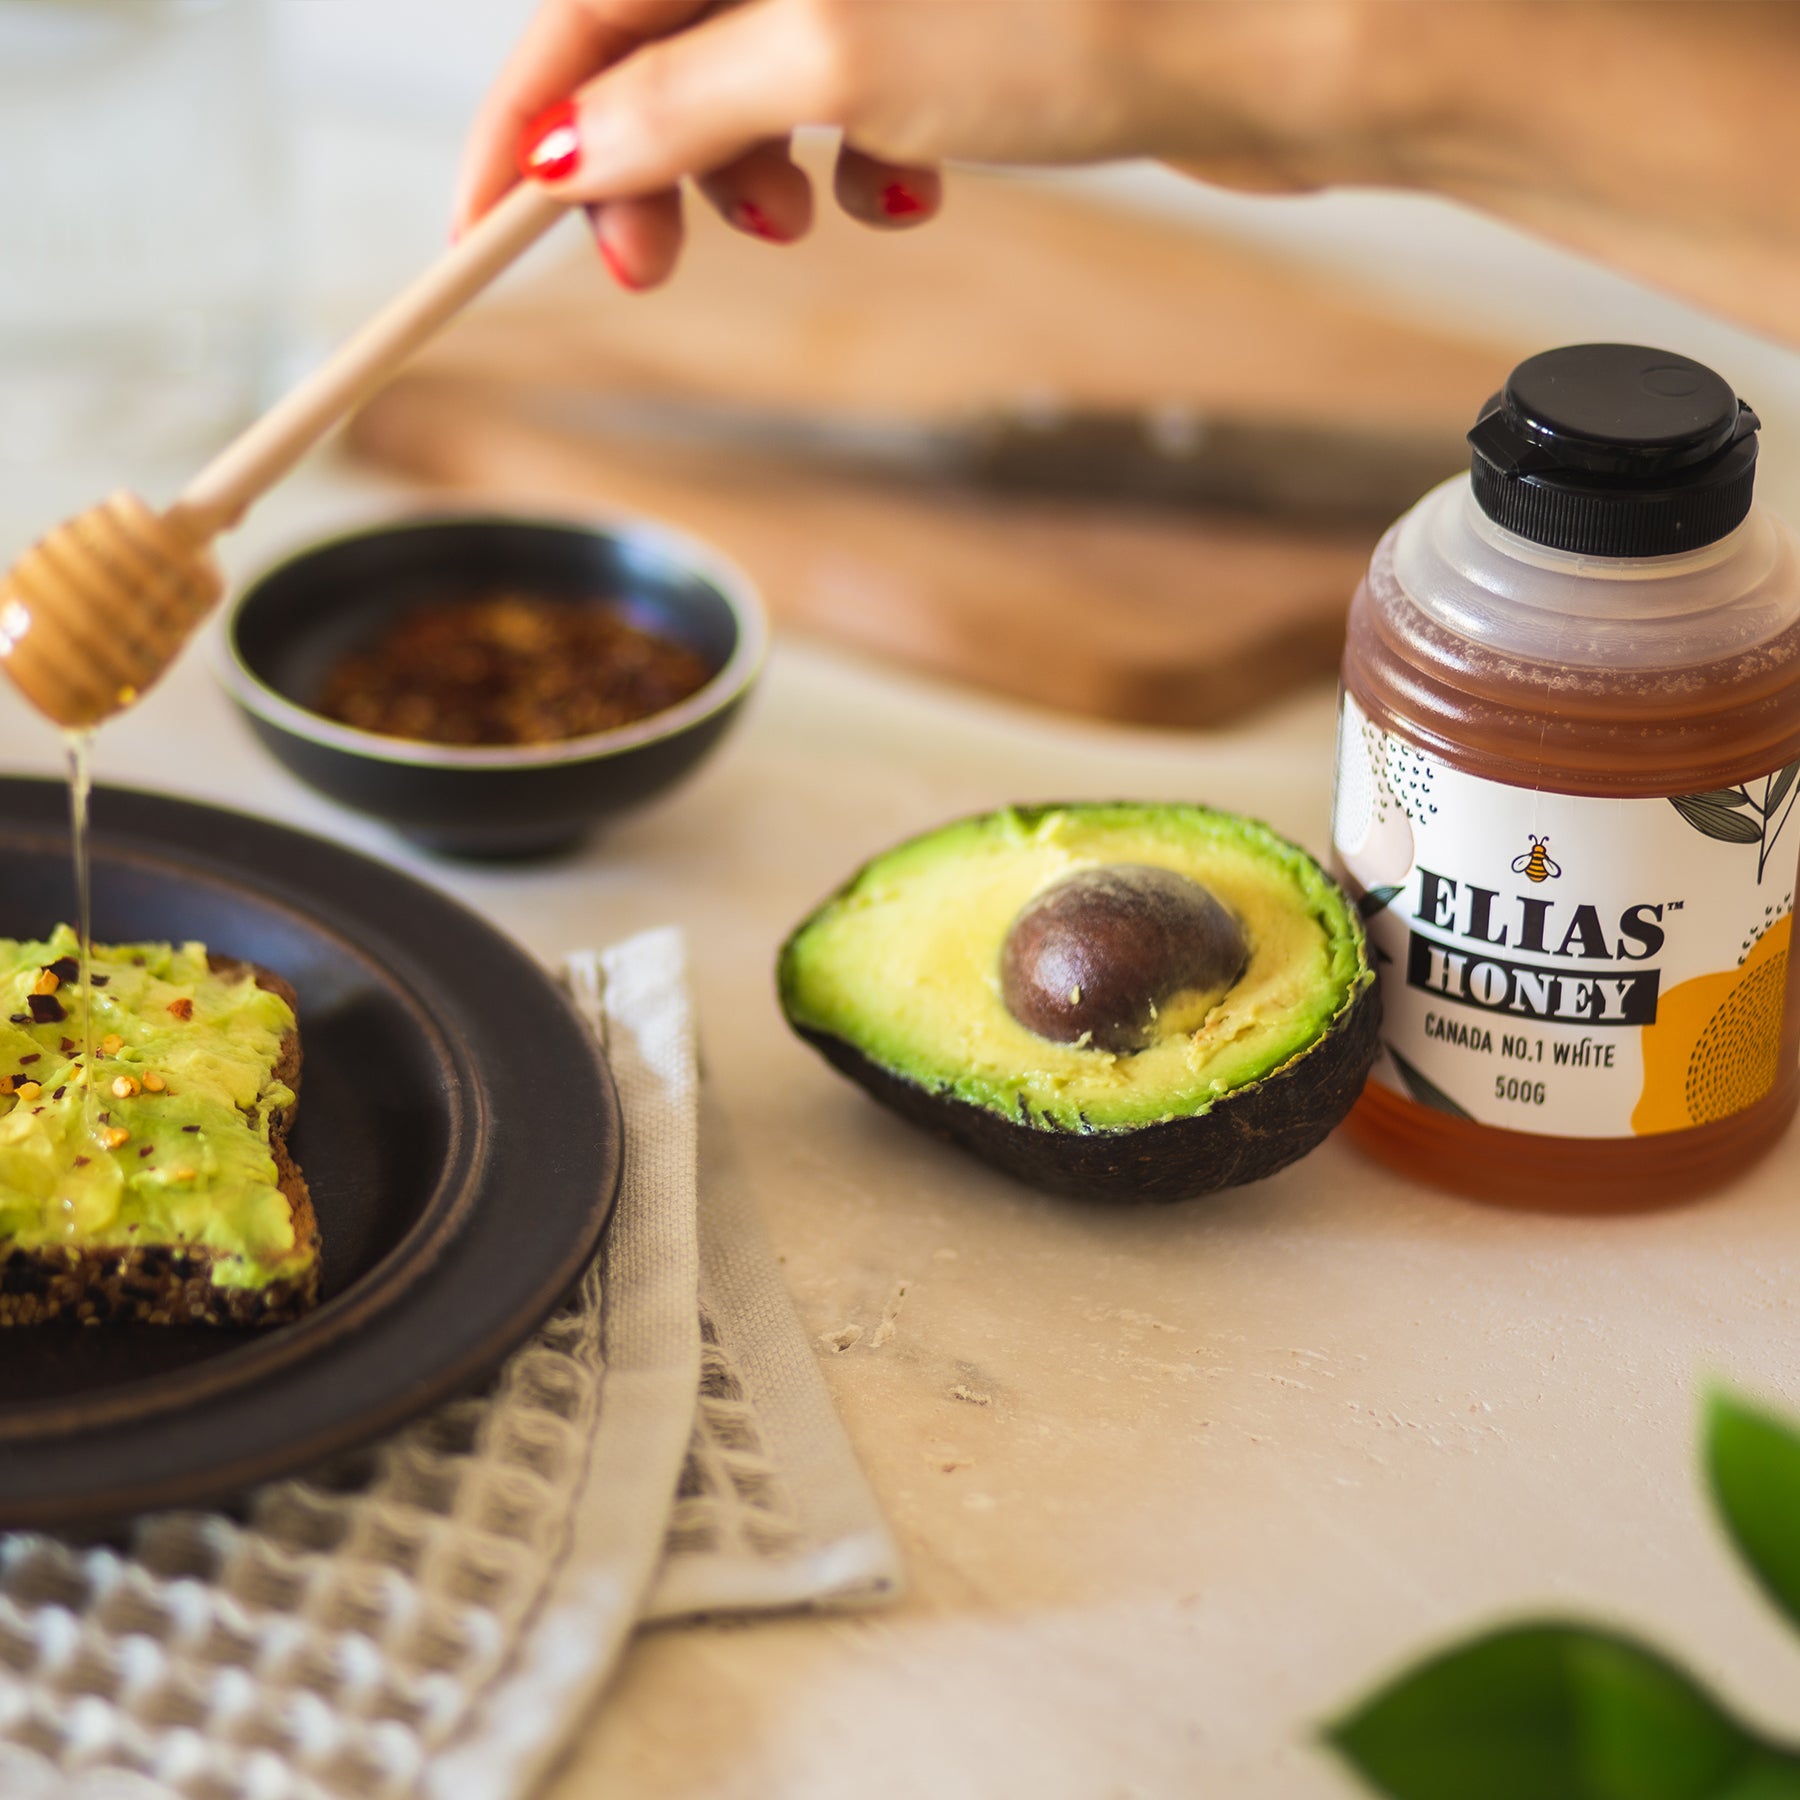 Image of Elias Canadian pure liquid honey being drizzled over avocado toast